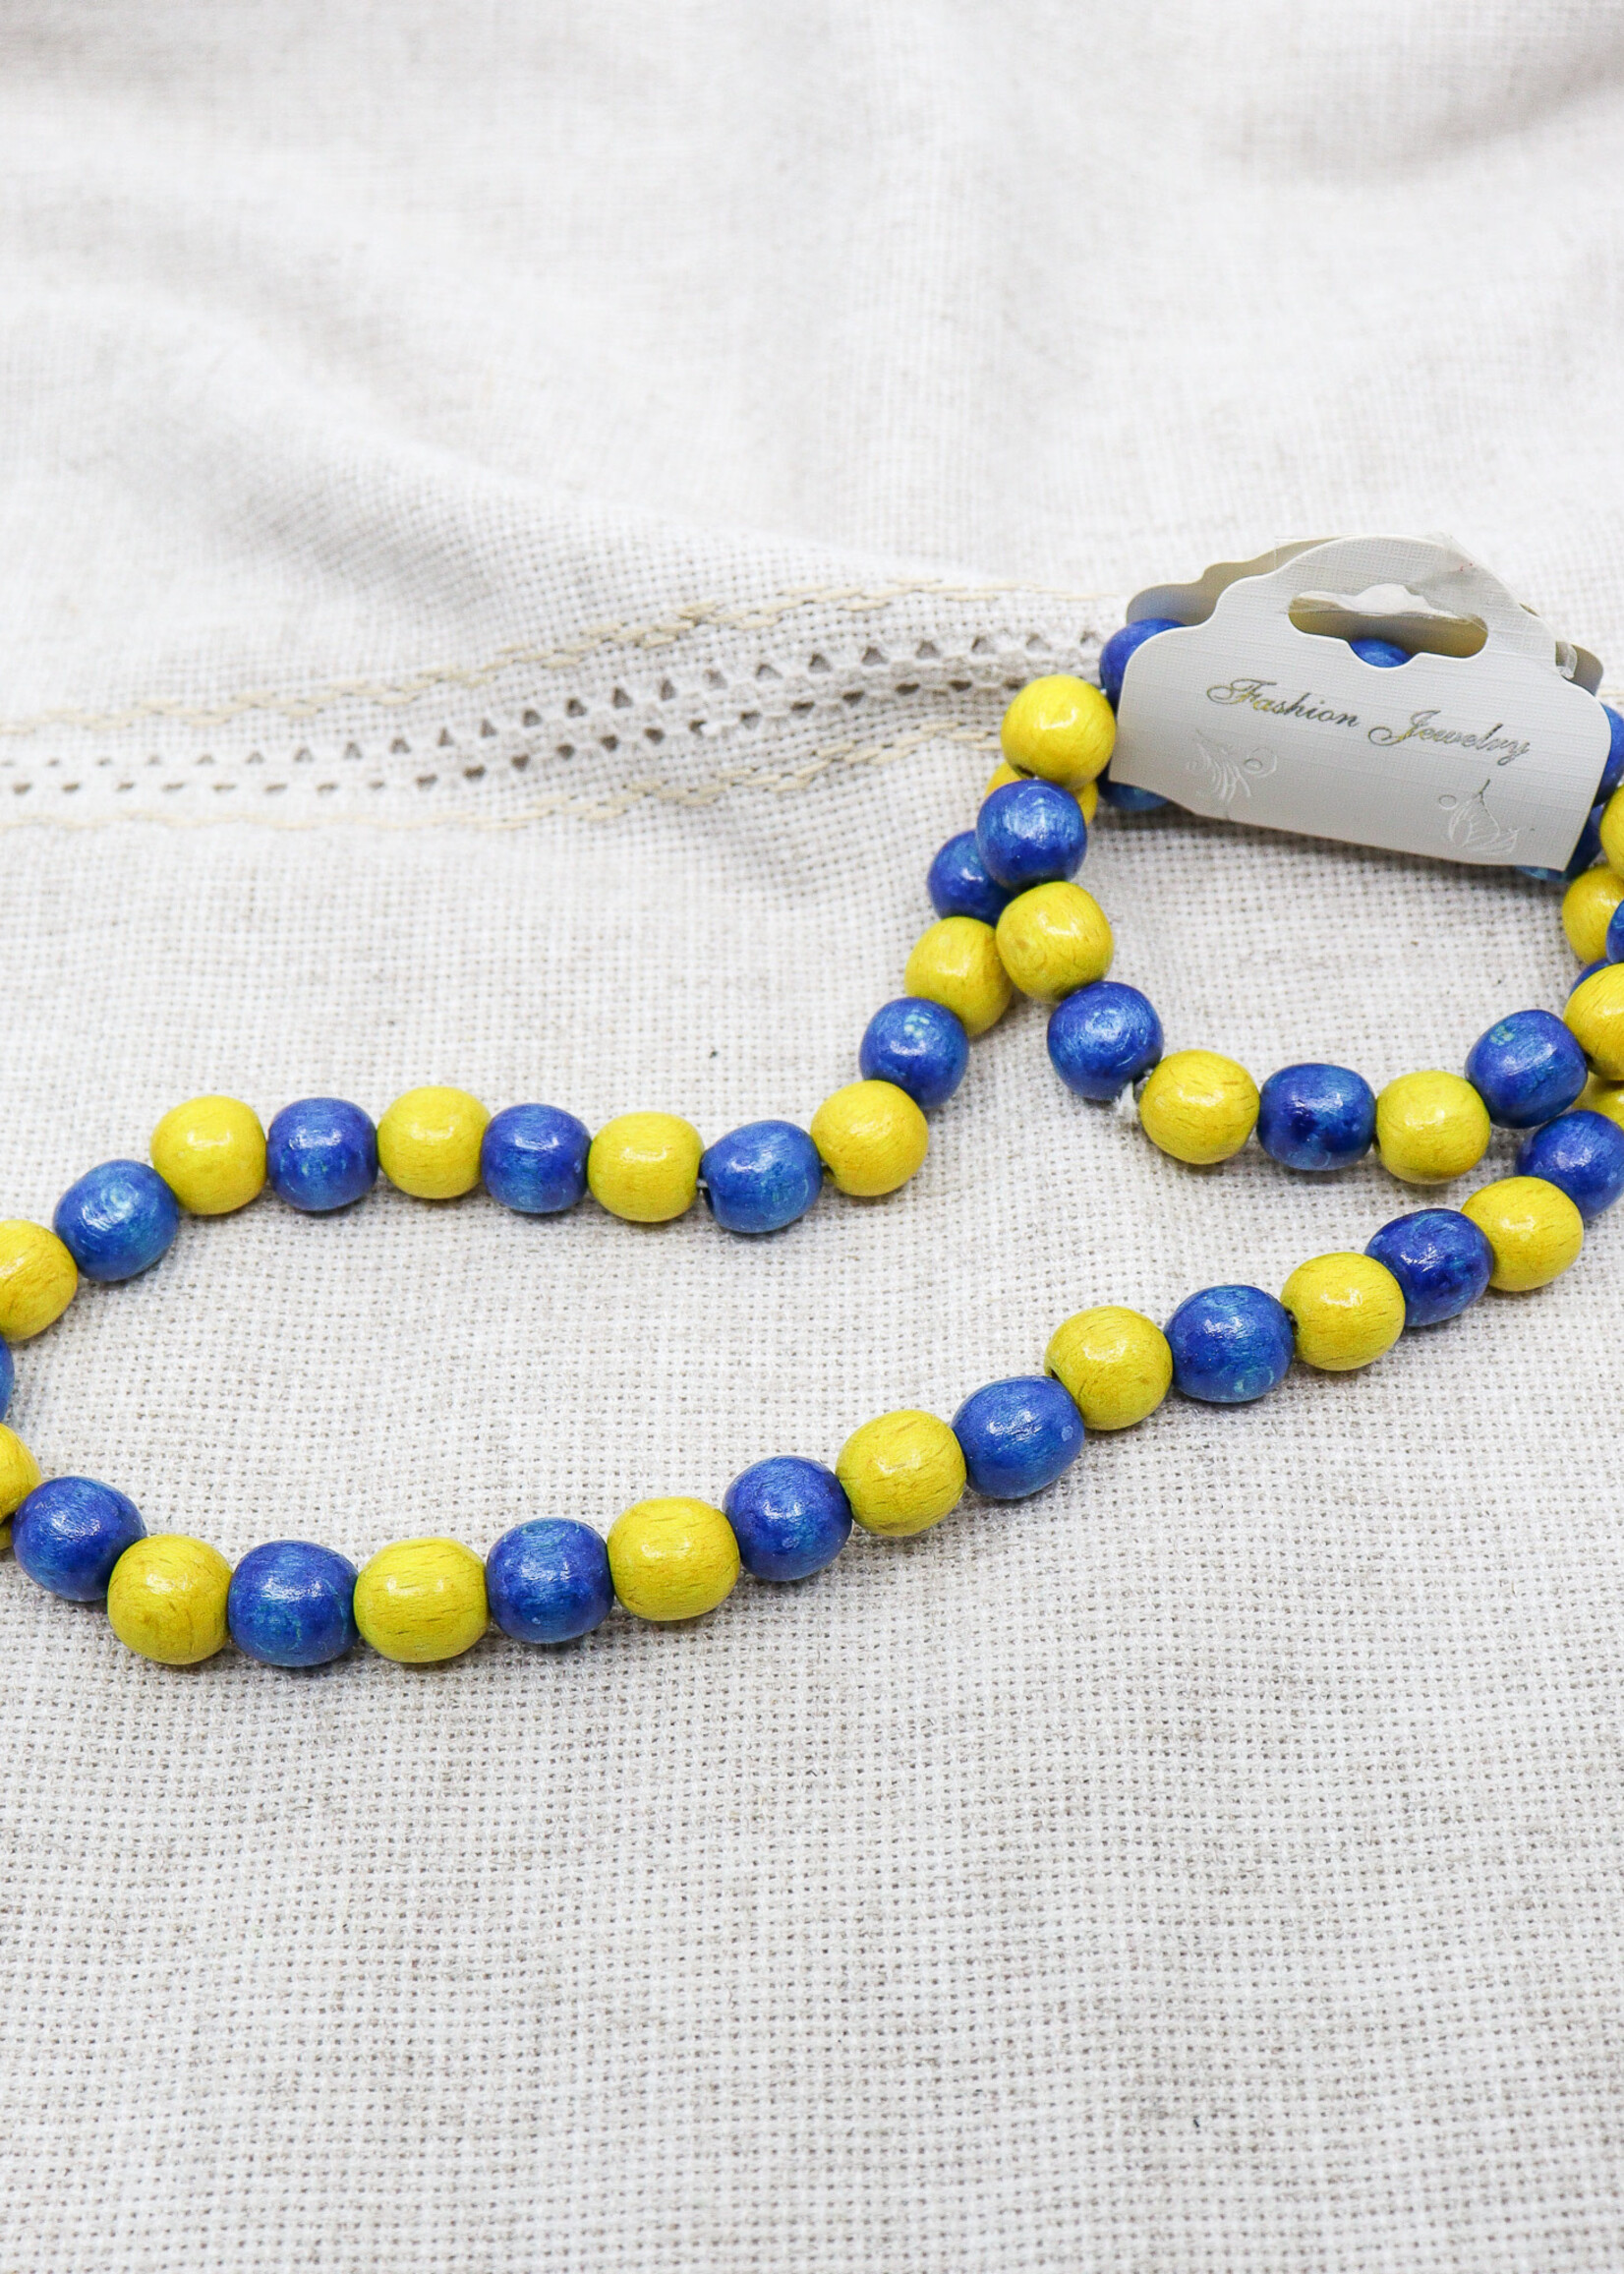 ACCESSORIES -  KIDs - Set of 2,  Necklace and Bracelet,  Wooden Blue/ Yellow beads